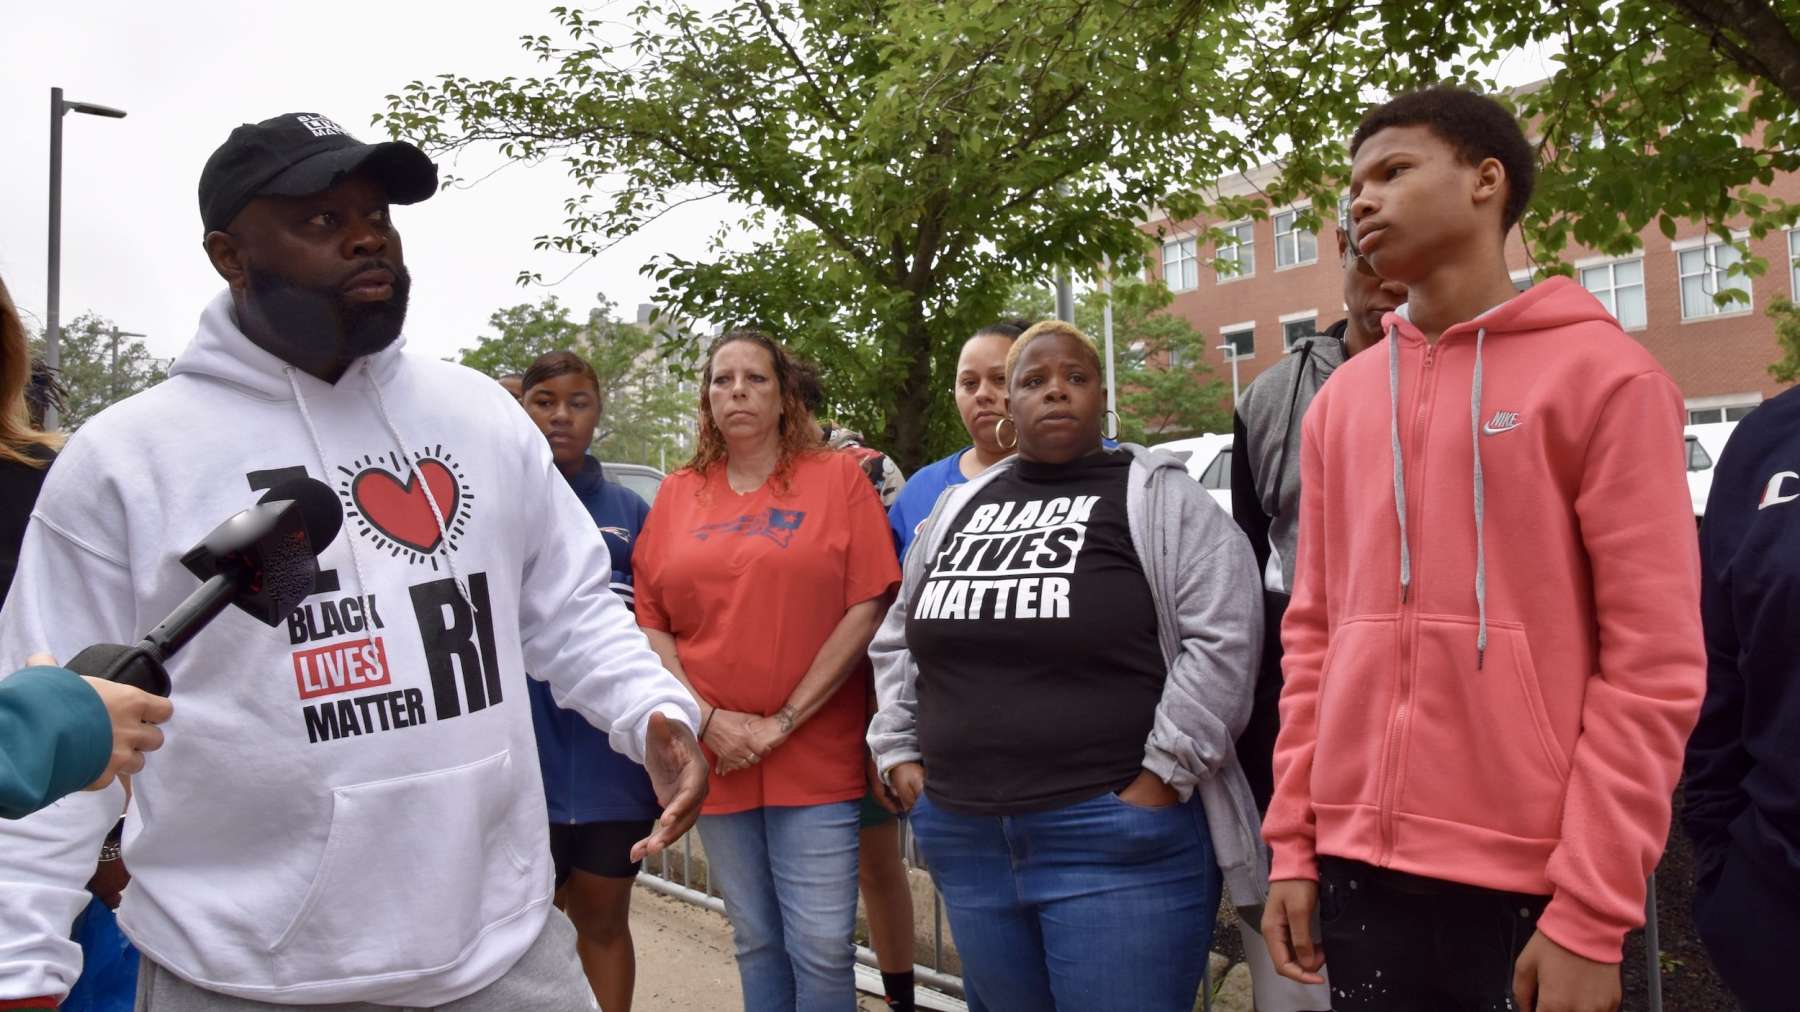 Black Lives Matter RI calls Sayles St incident ‘one of the worst assaults in Rhode Island history’